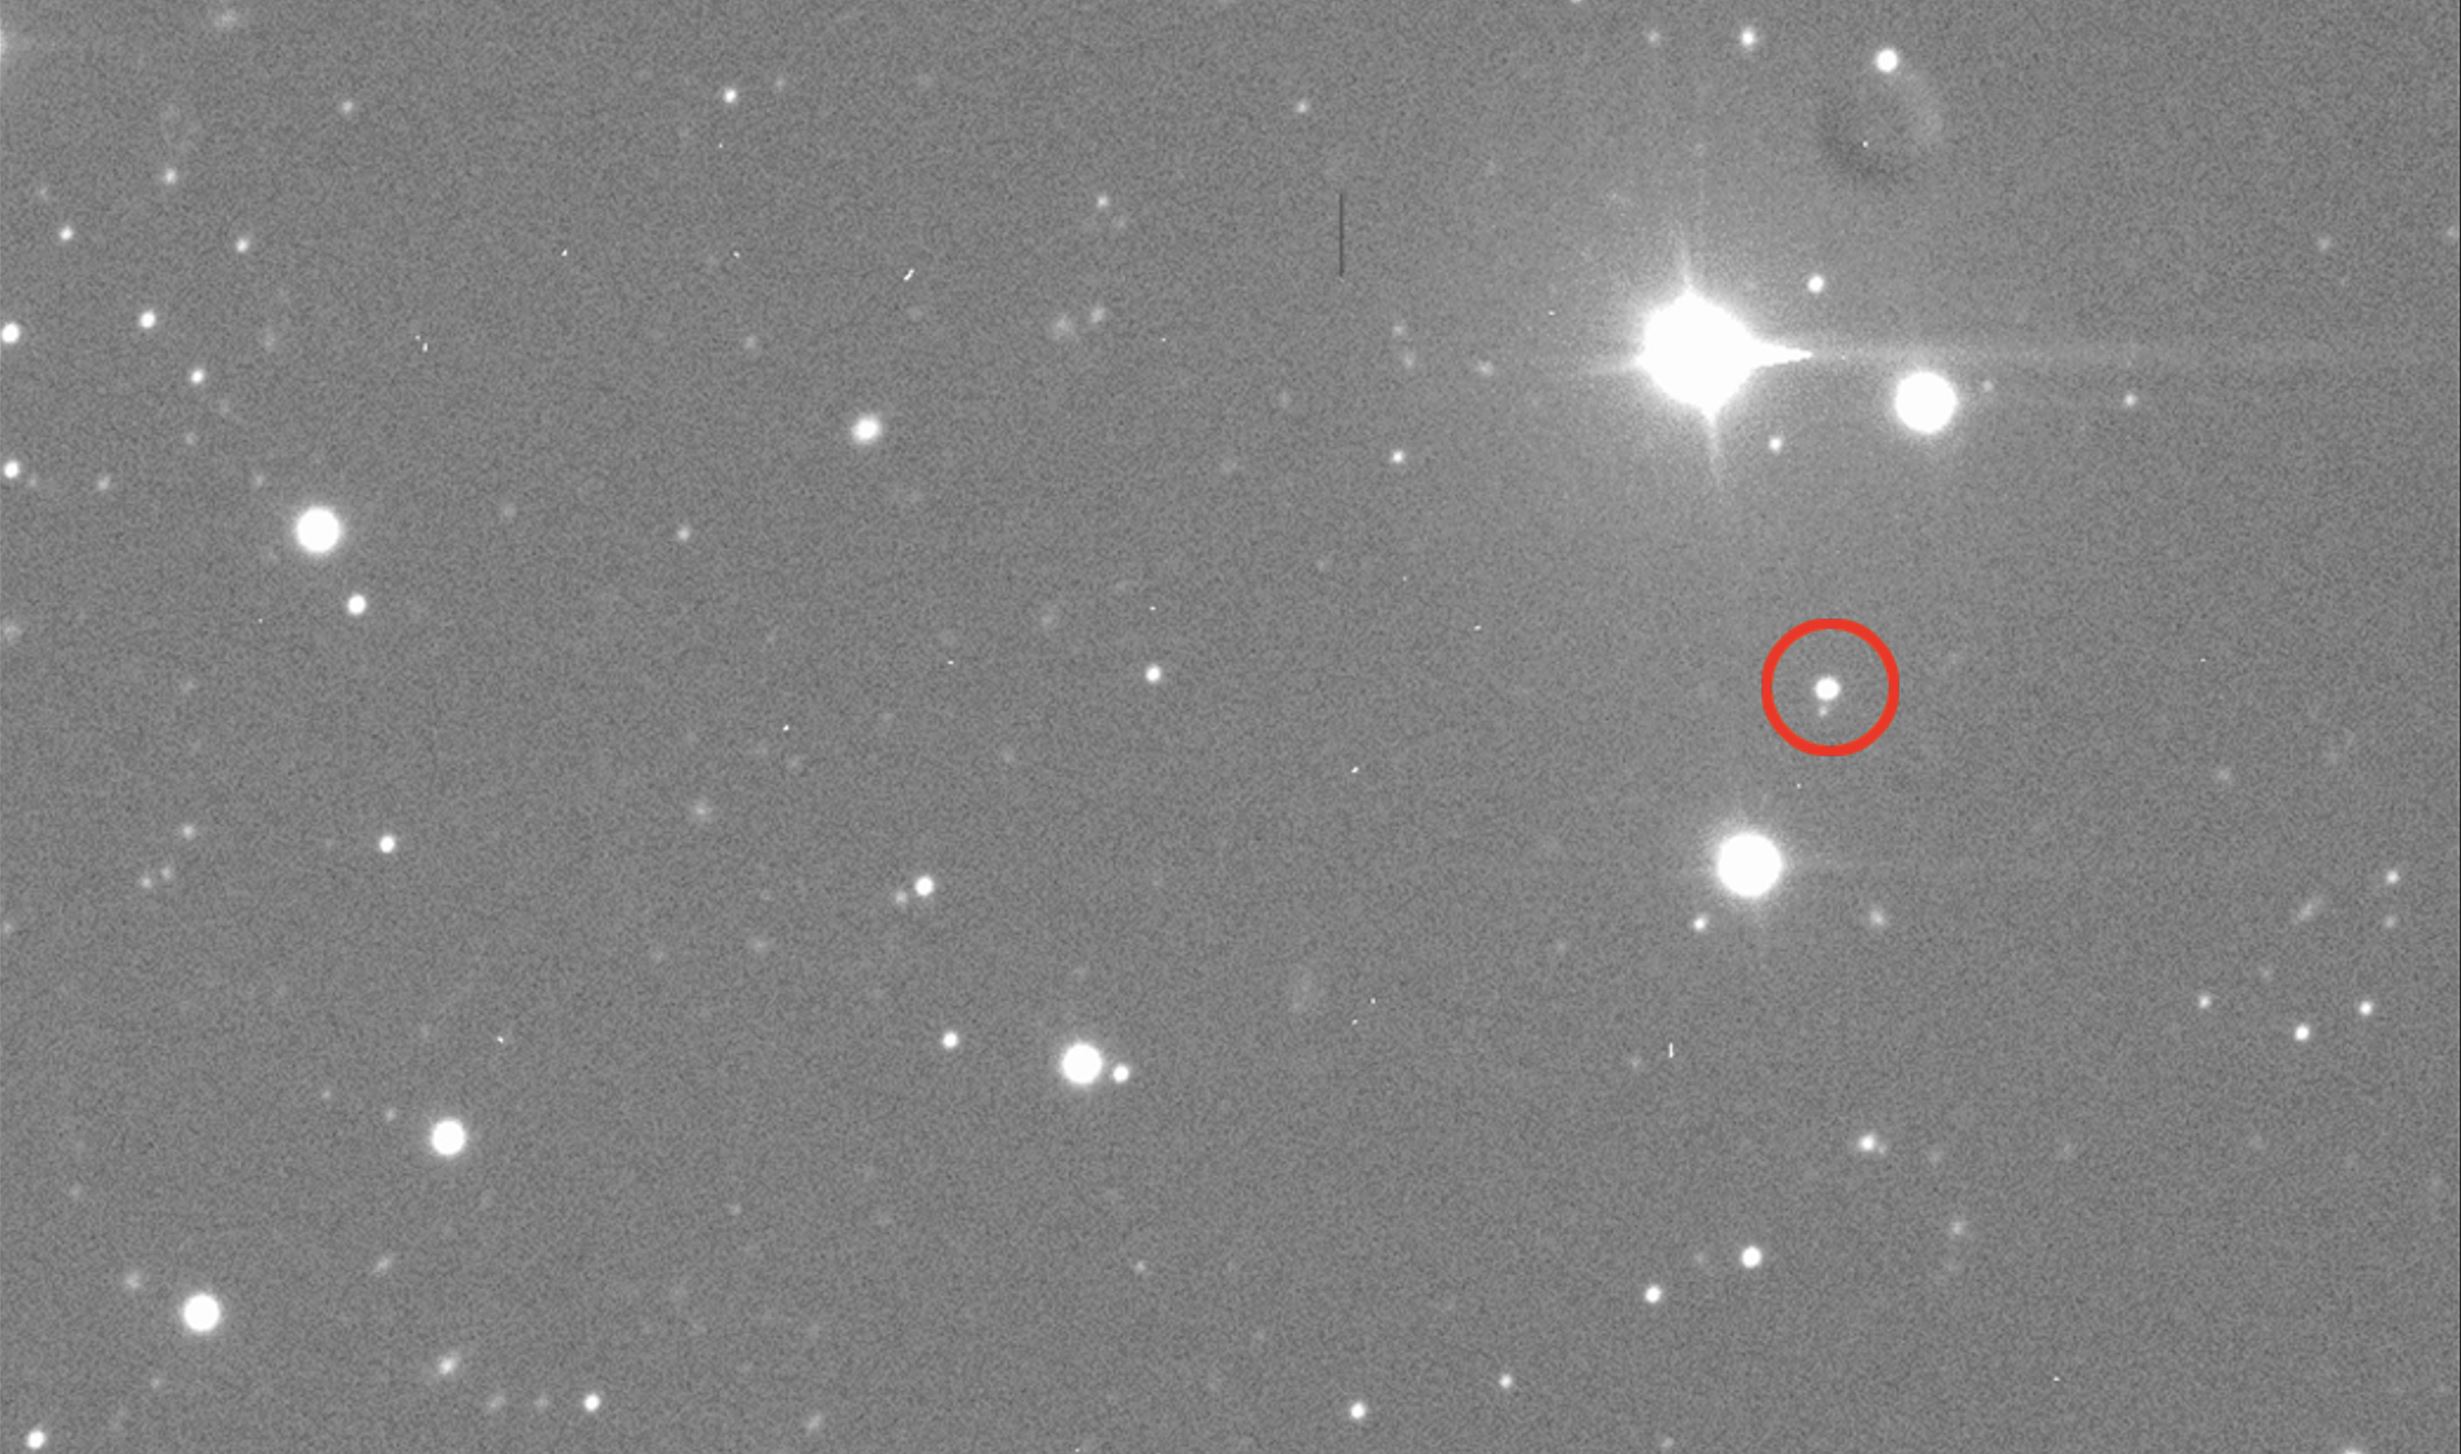 A cropped image showing Dimorphos circled in red, the target of the DART mission by NASA. Image Credit: Lowell Observatory/N. Moskovitz.